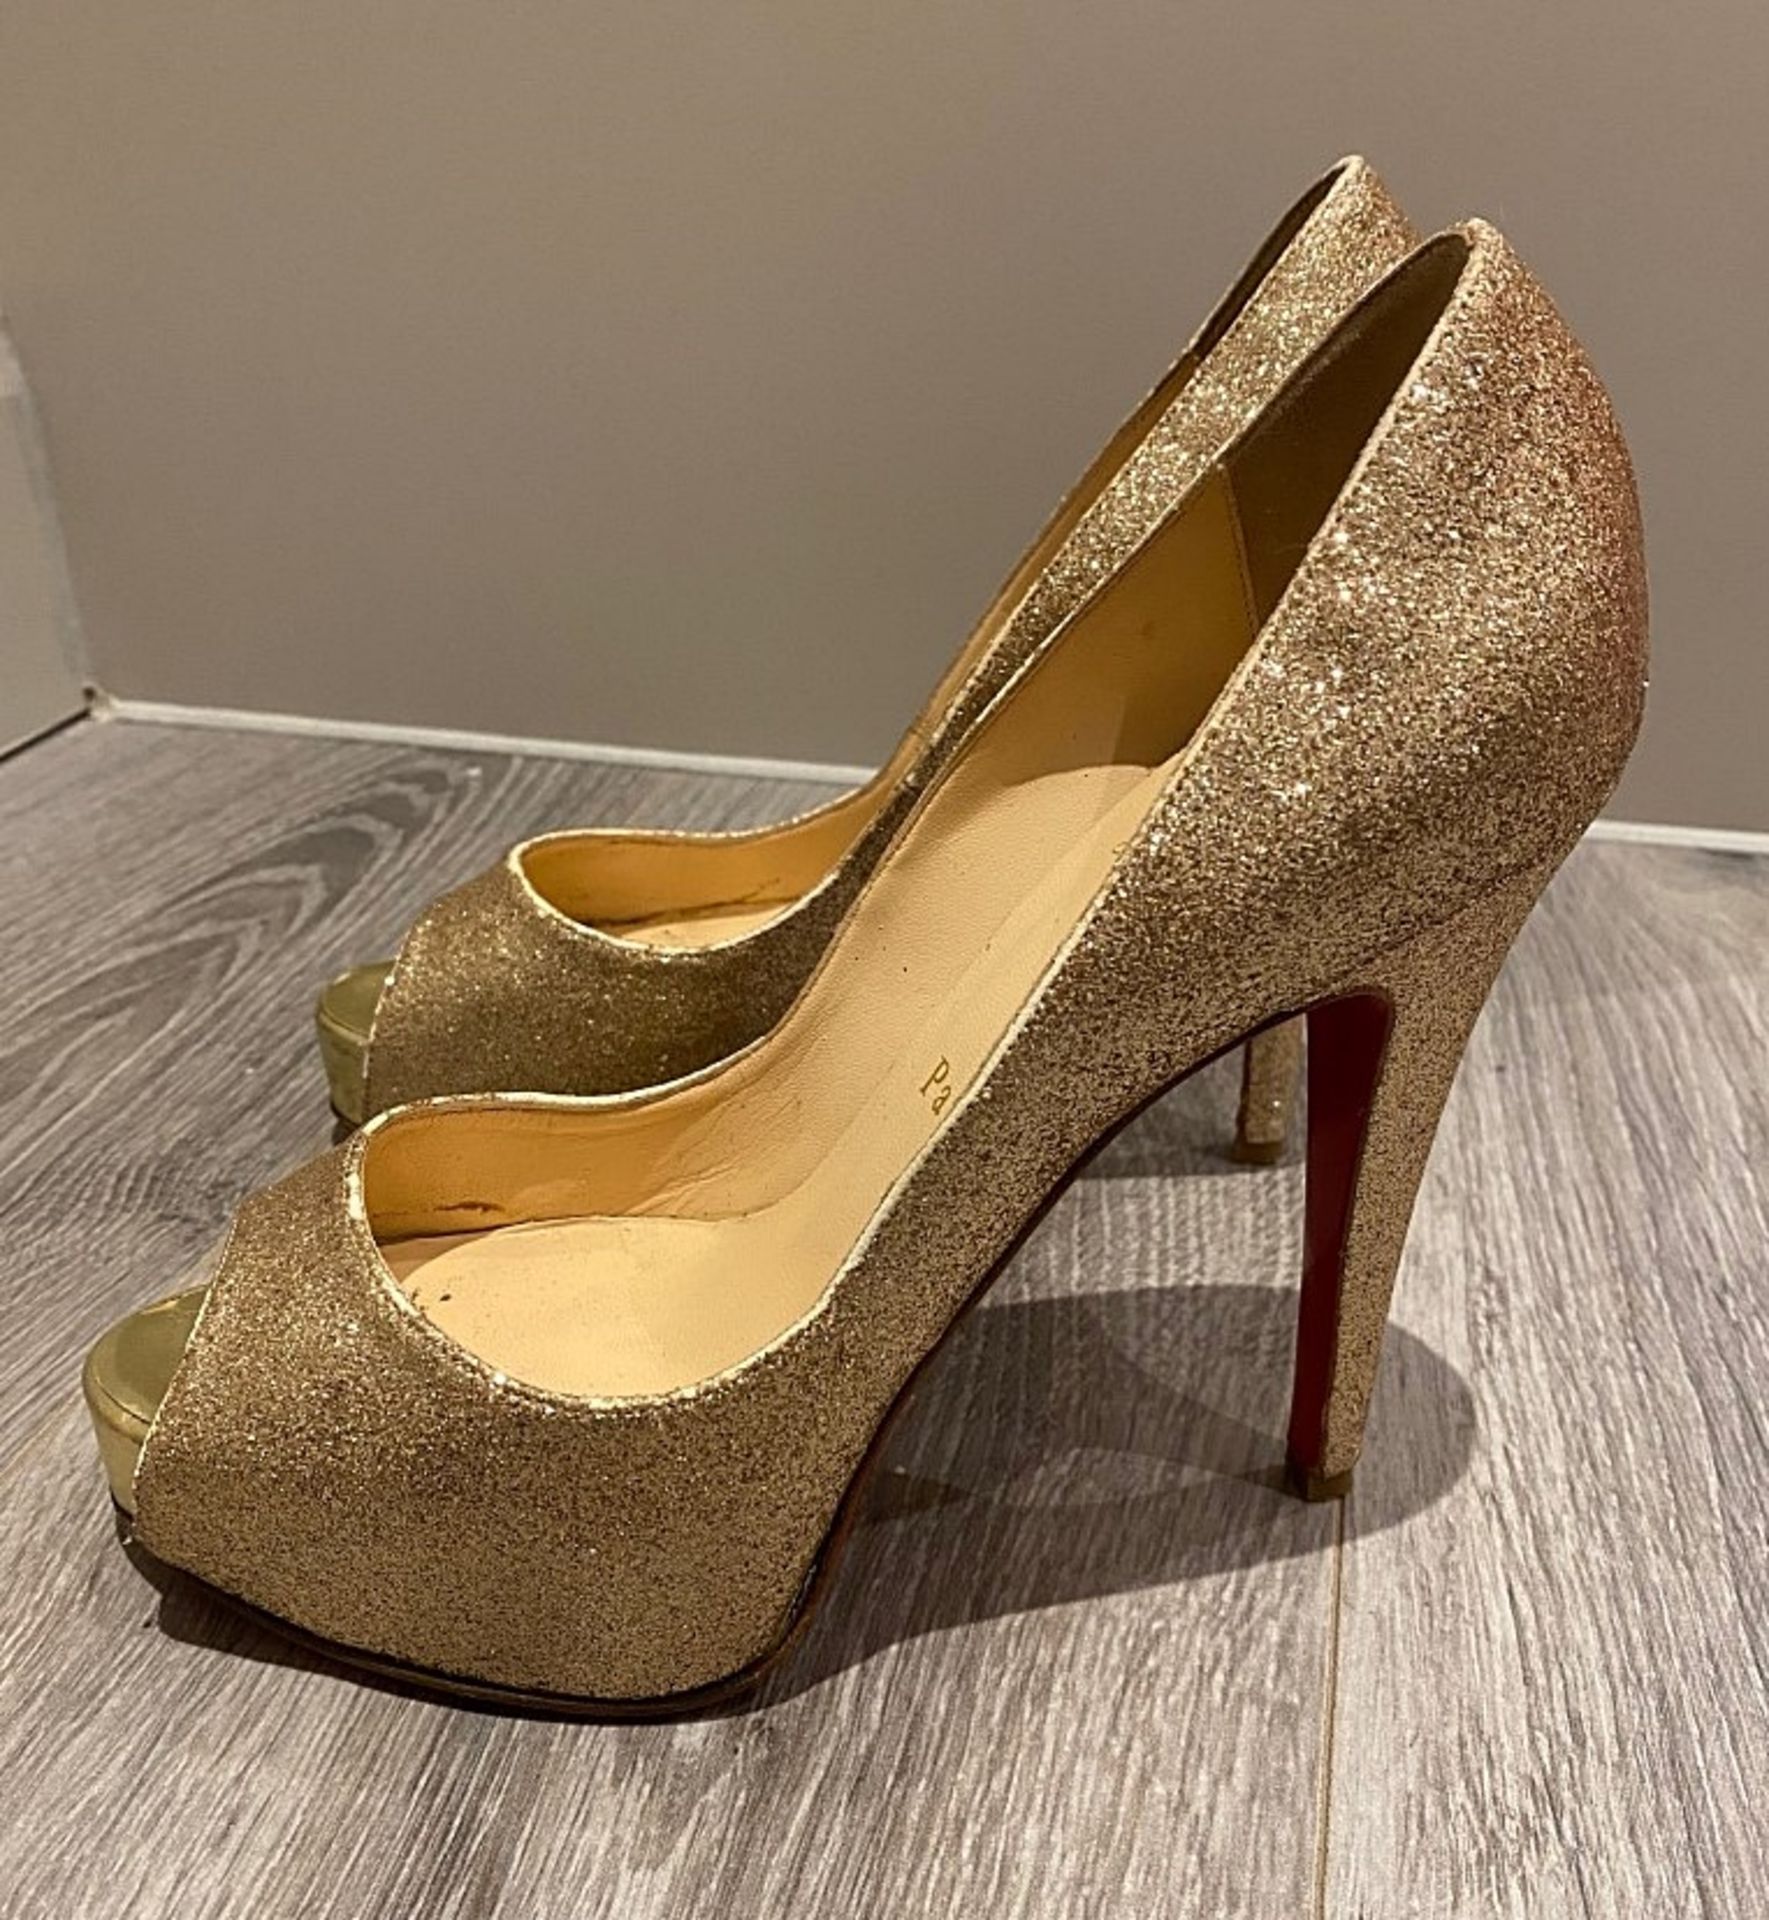 1 x Pair Of Genuine Christain Louboutin High Heel Shoes In Gold - Size: 36.5 - Preowned in Worn